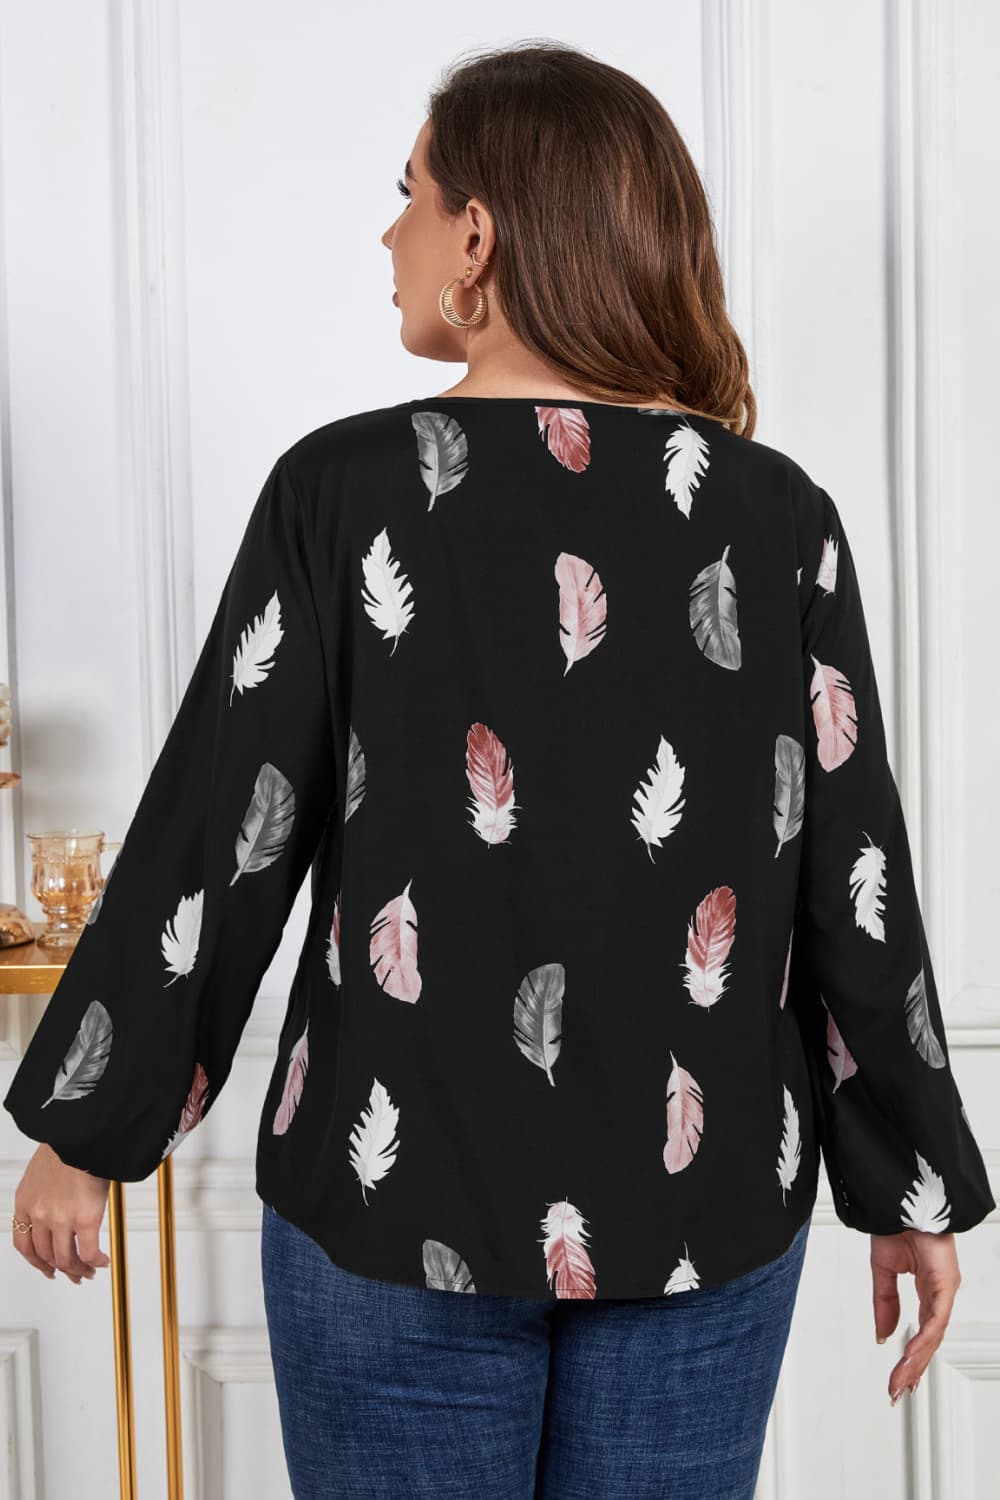 Melo Apparel Plus Size Printed Round Neck Long Sleeve Cutout Blouse